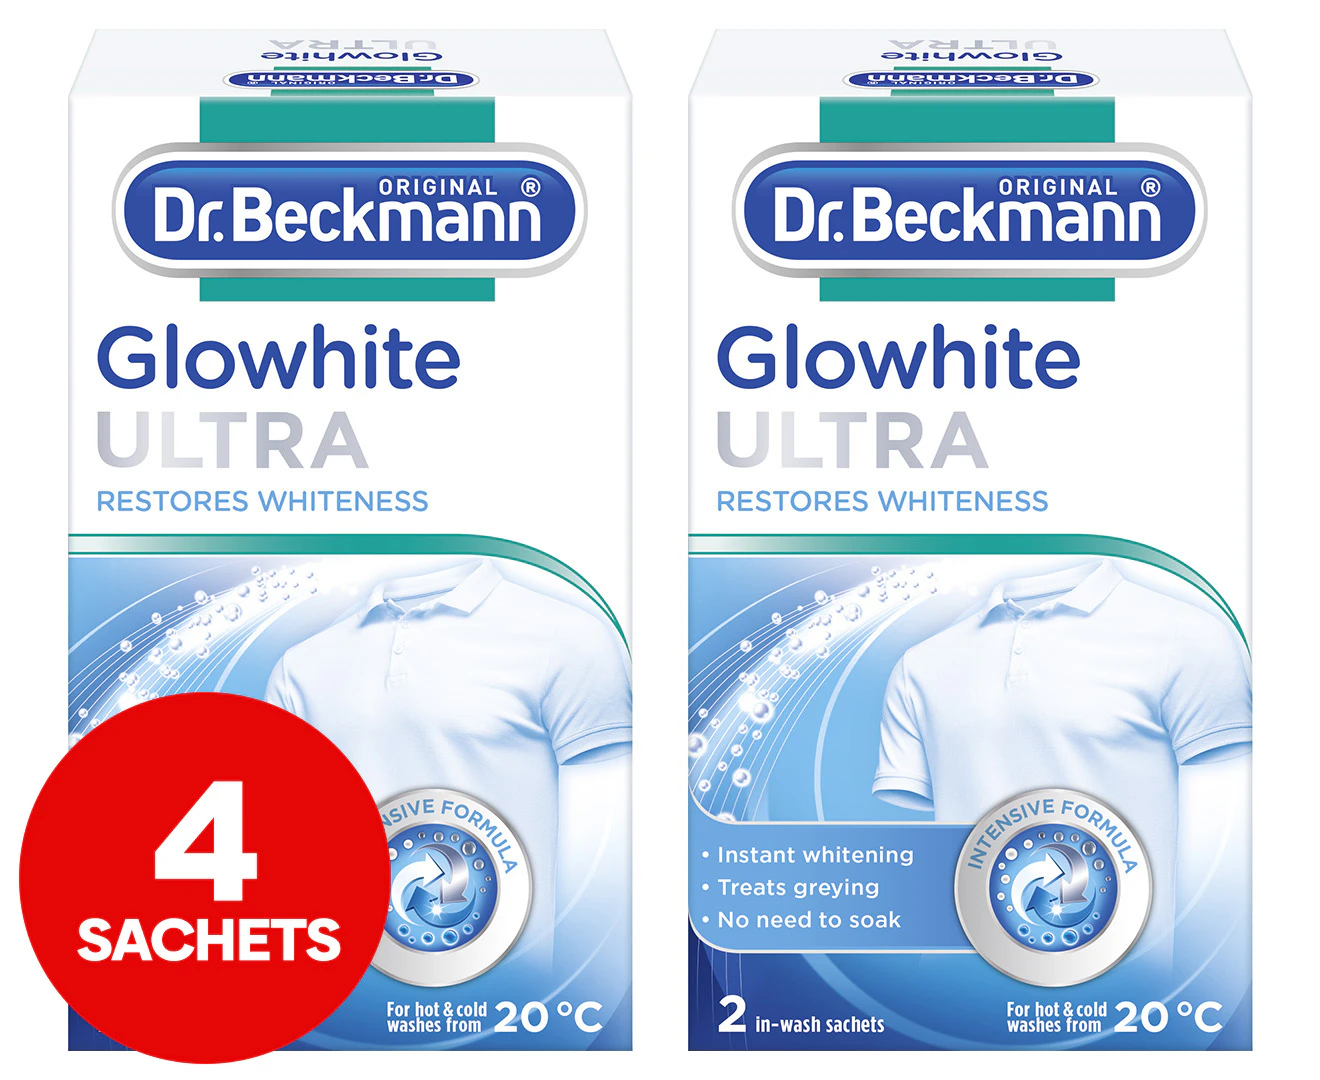 Glowhite Clothes Whitener Laundry Whites With Stain Remover By Dr Beckmann